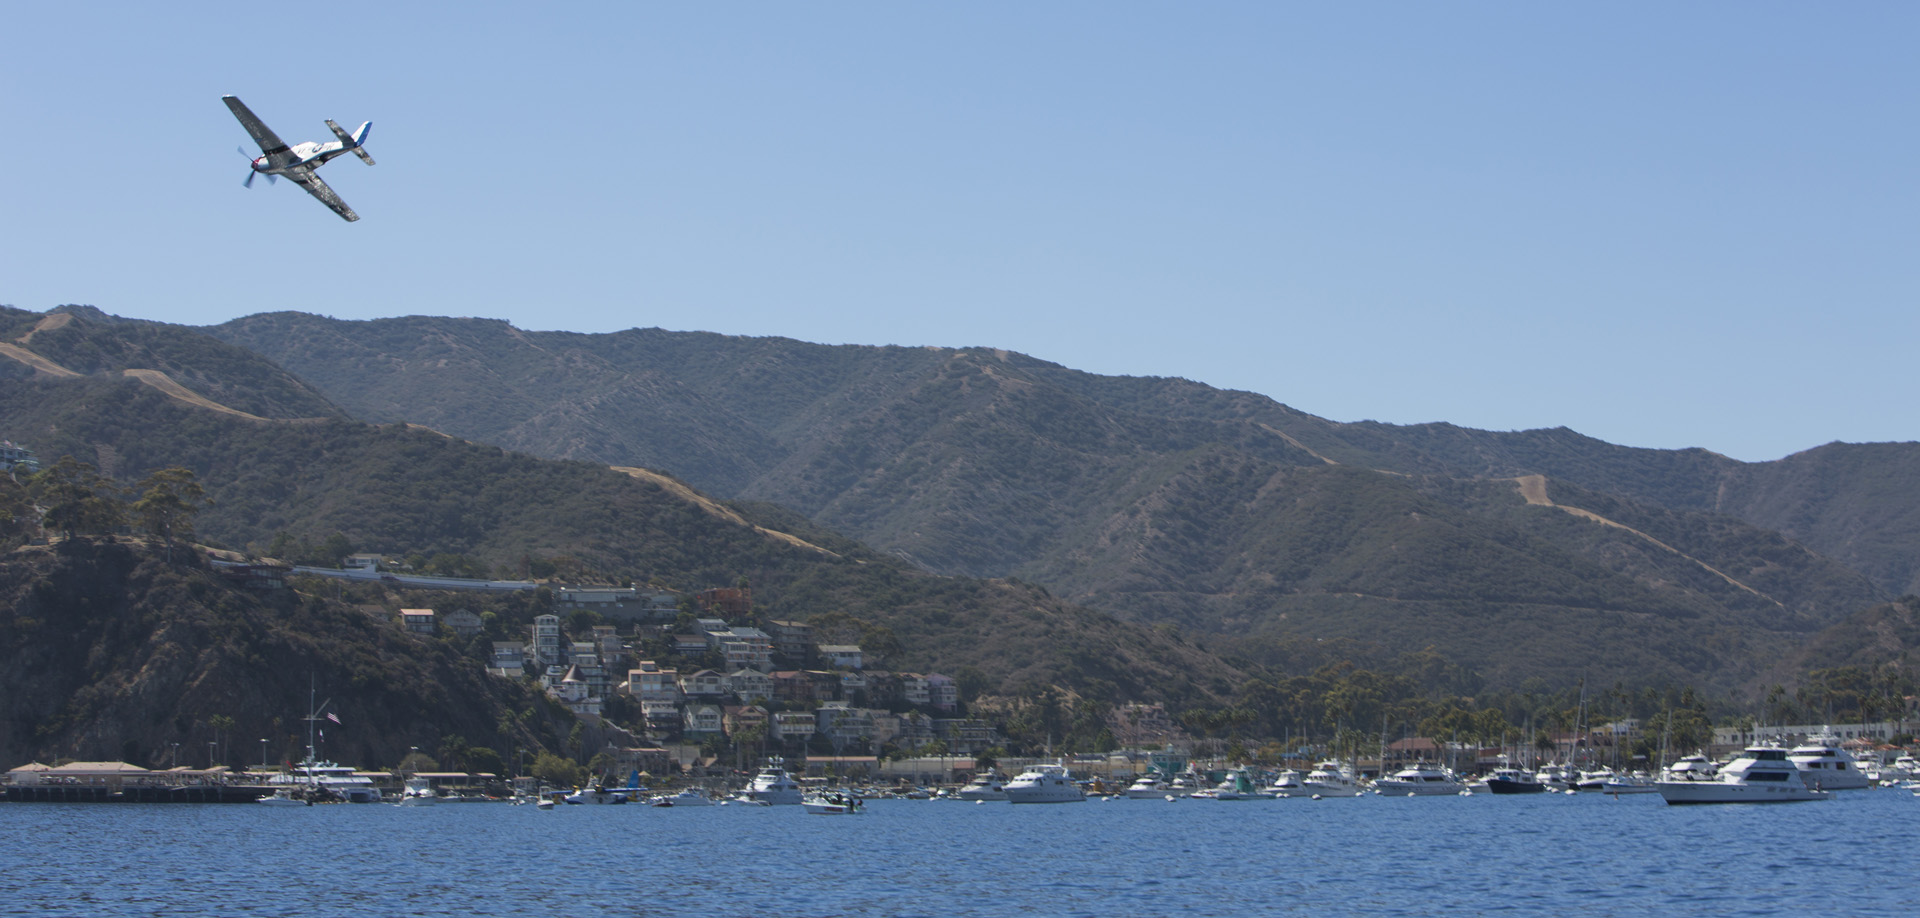 A P-51 Mustang flying over Avalon Harbor at the Catalina Air Show last year. (photo via Catalina Air Show)